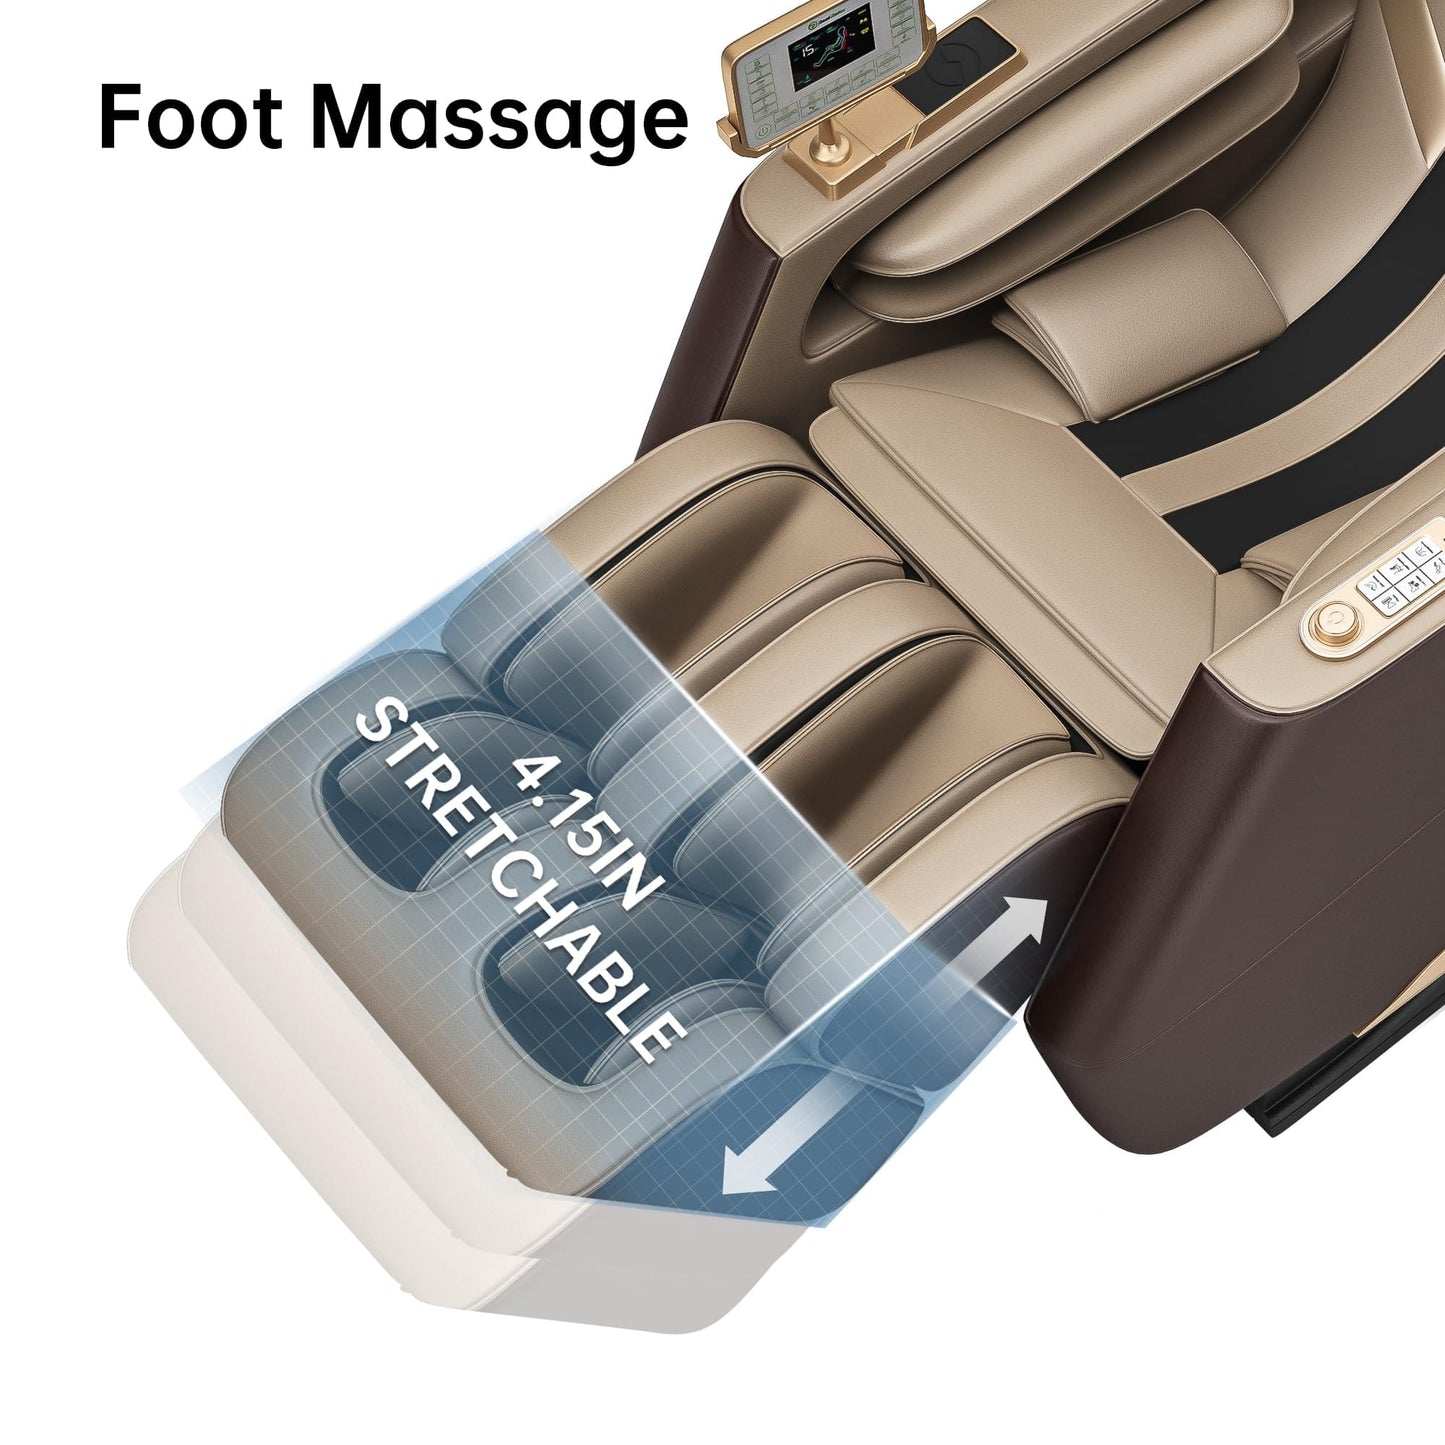 Real Relax Massage Chair PS3500 Massage Chair Brown